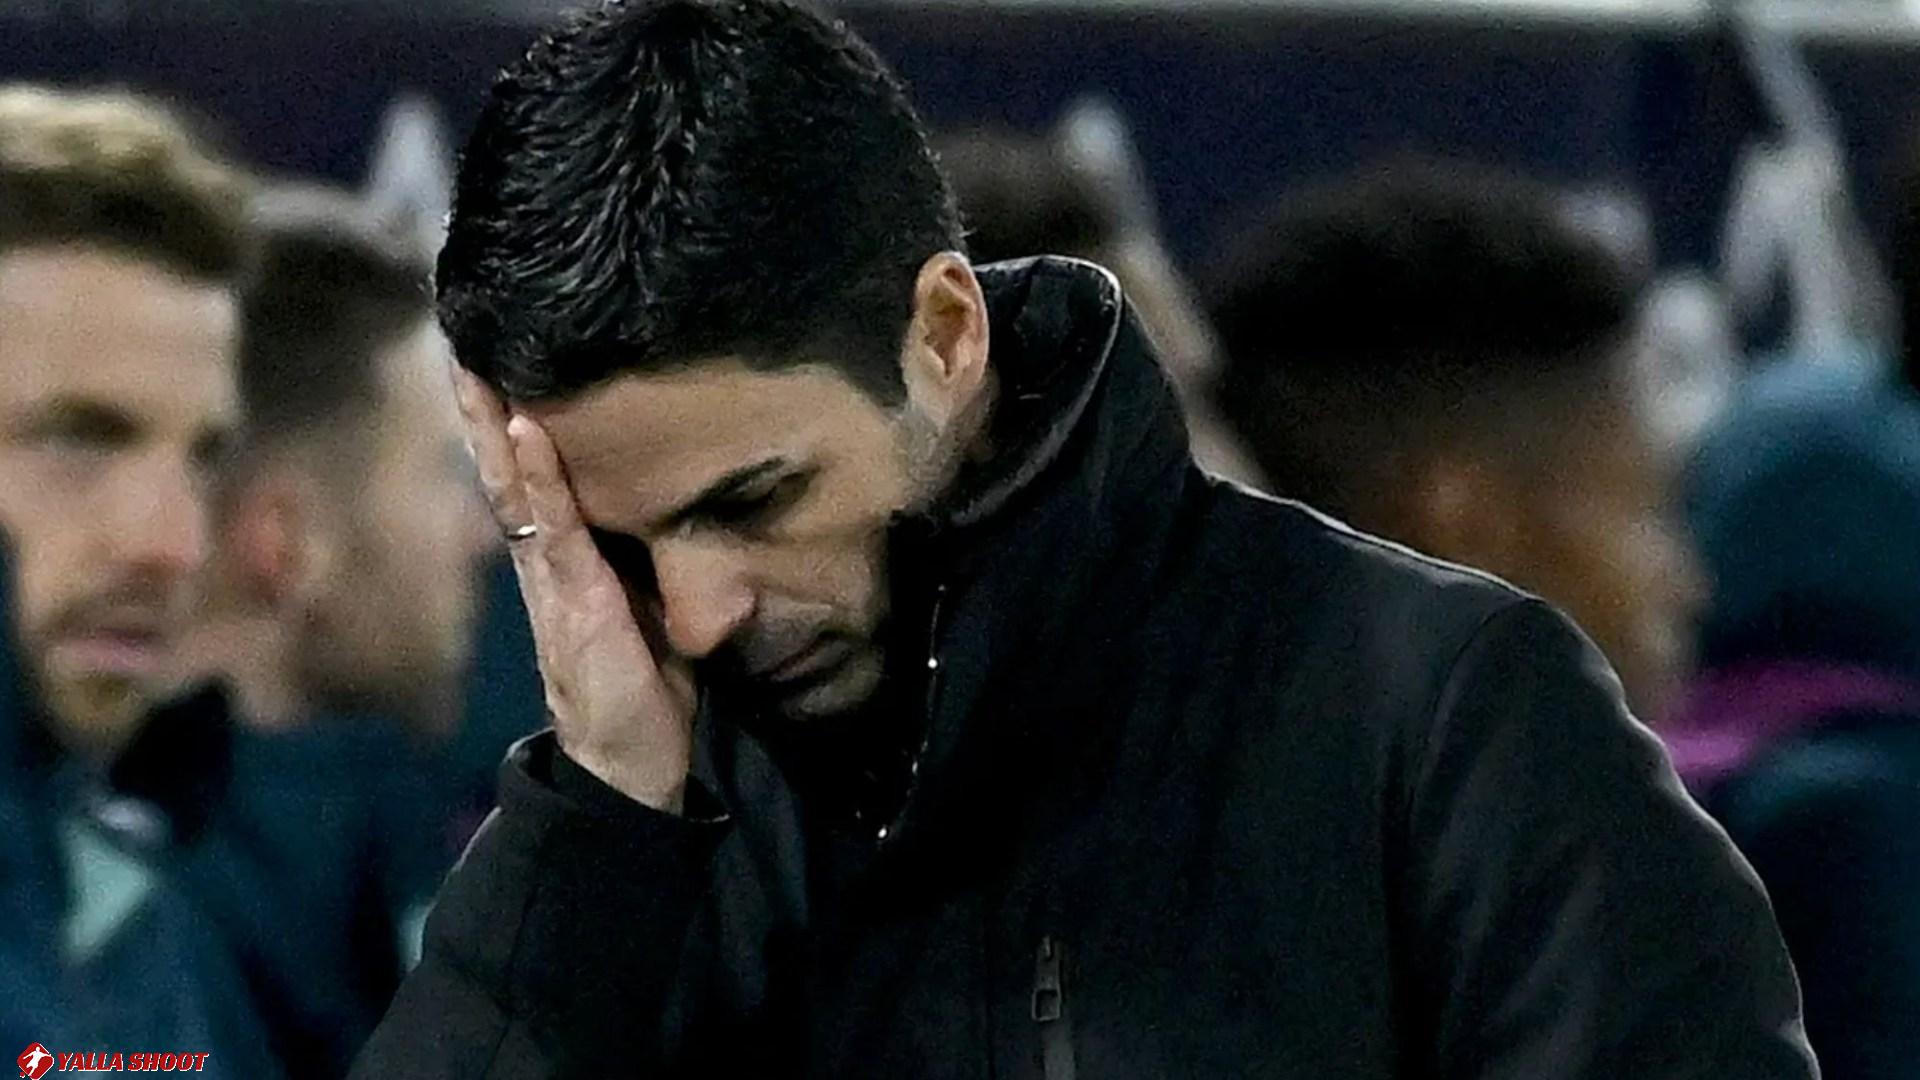 Mikel Arteta slapped with touchline BAN after Arsenal’s dramatic last-gasp winner against Luton